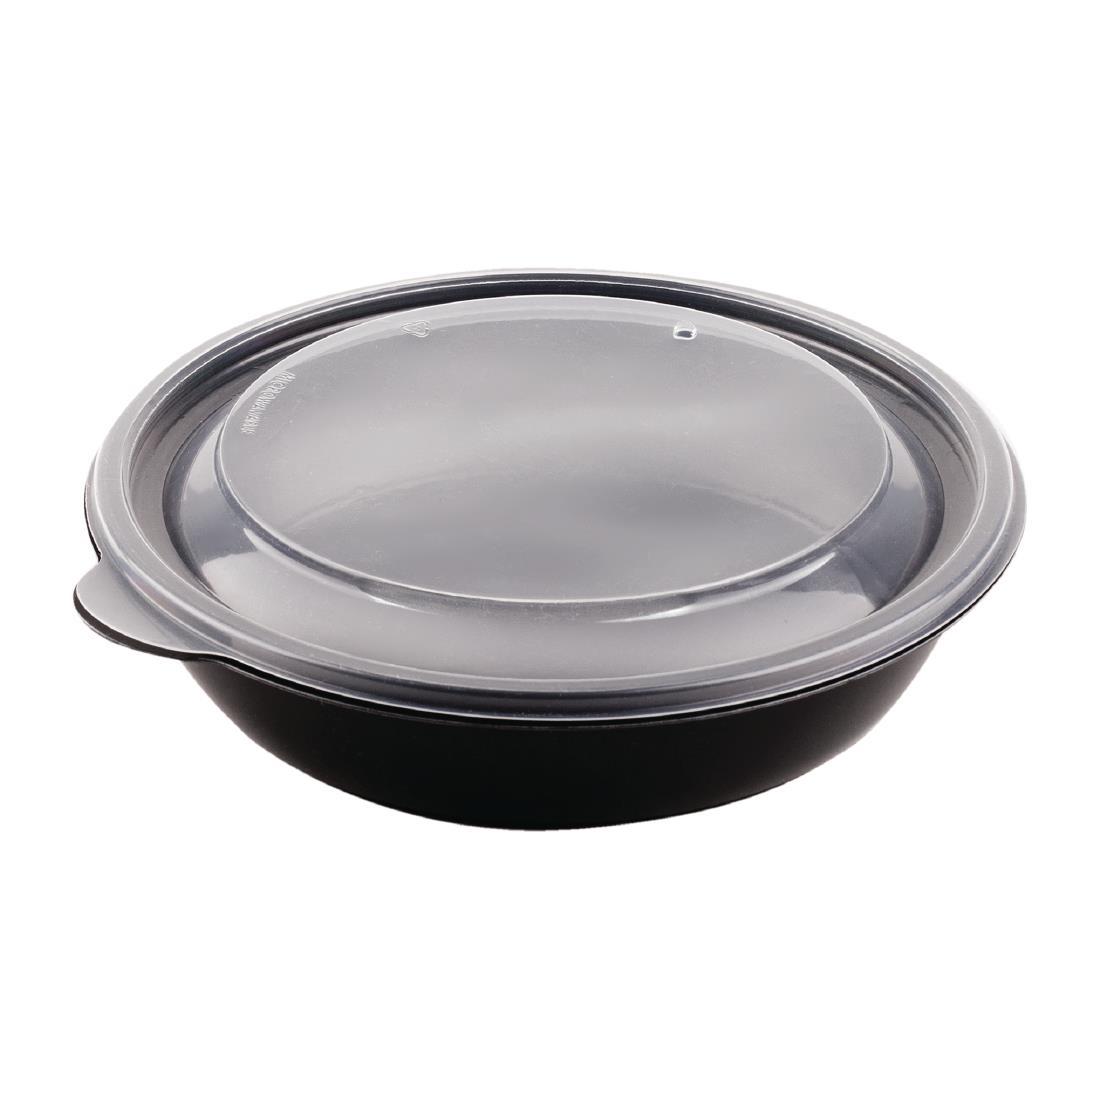 Fastpac Medium Round Food Containers 750ml / 26oz (Pack of 300) - DW786  - 2